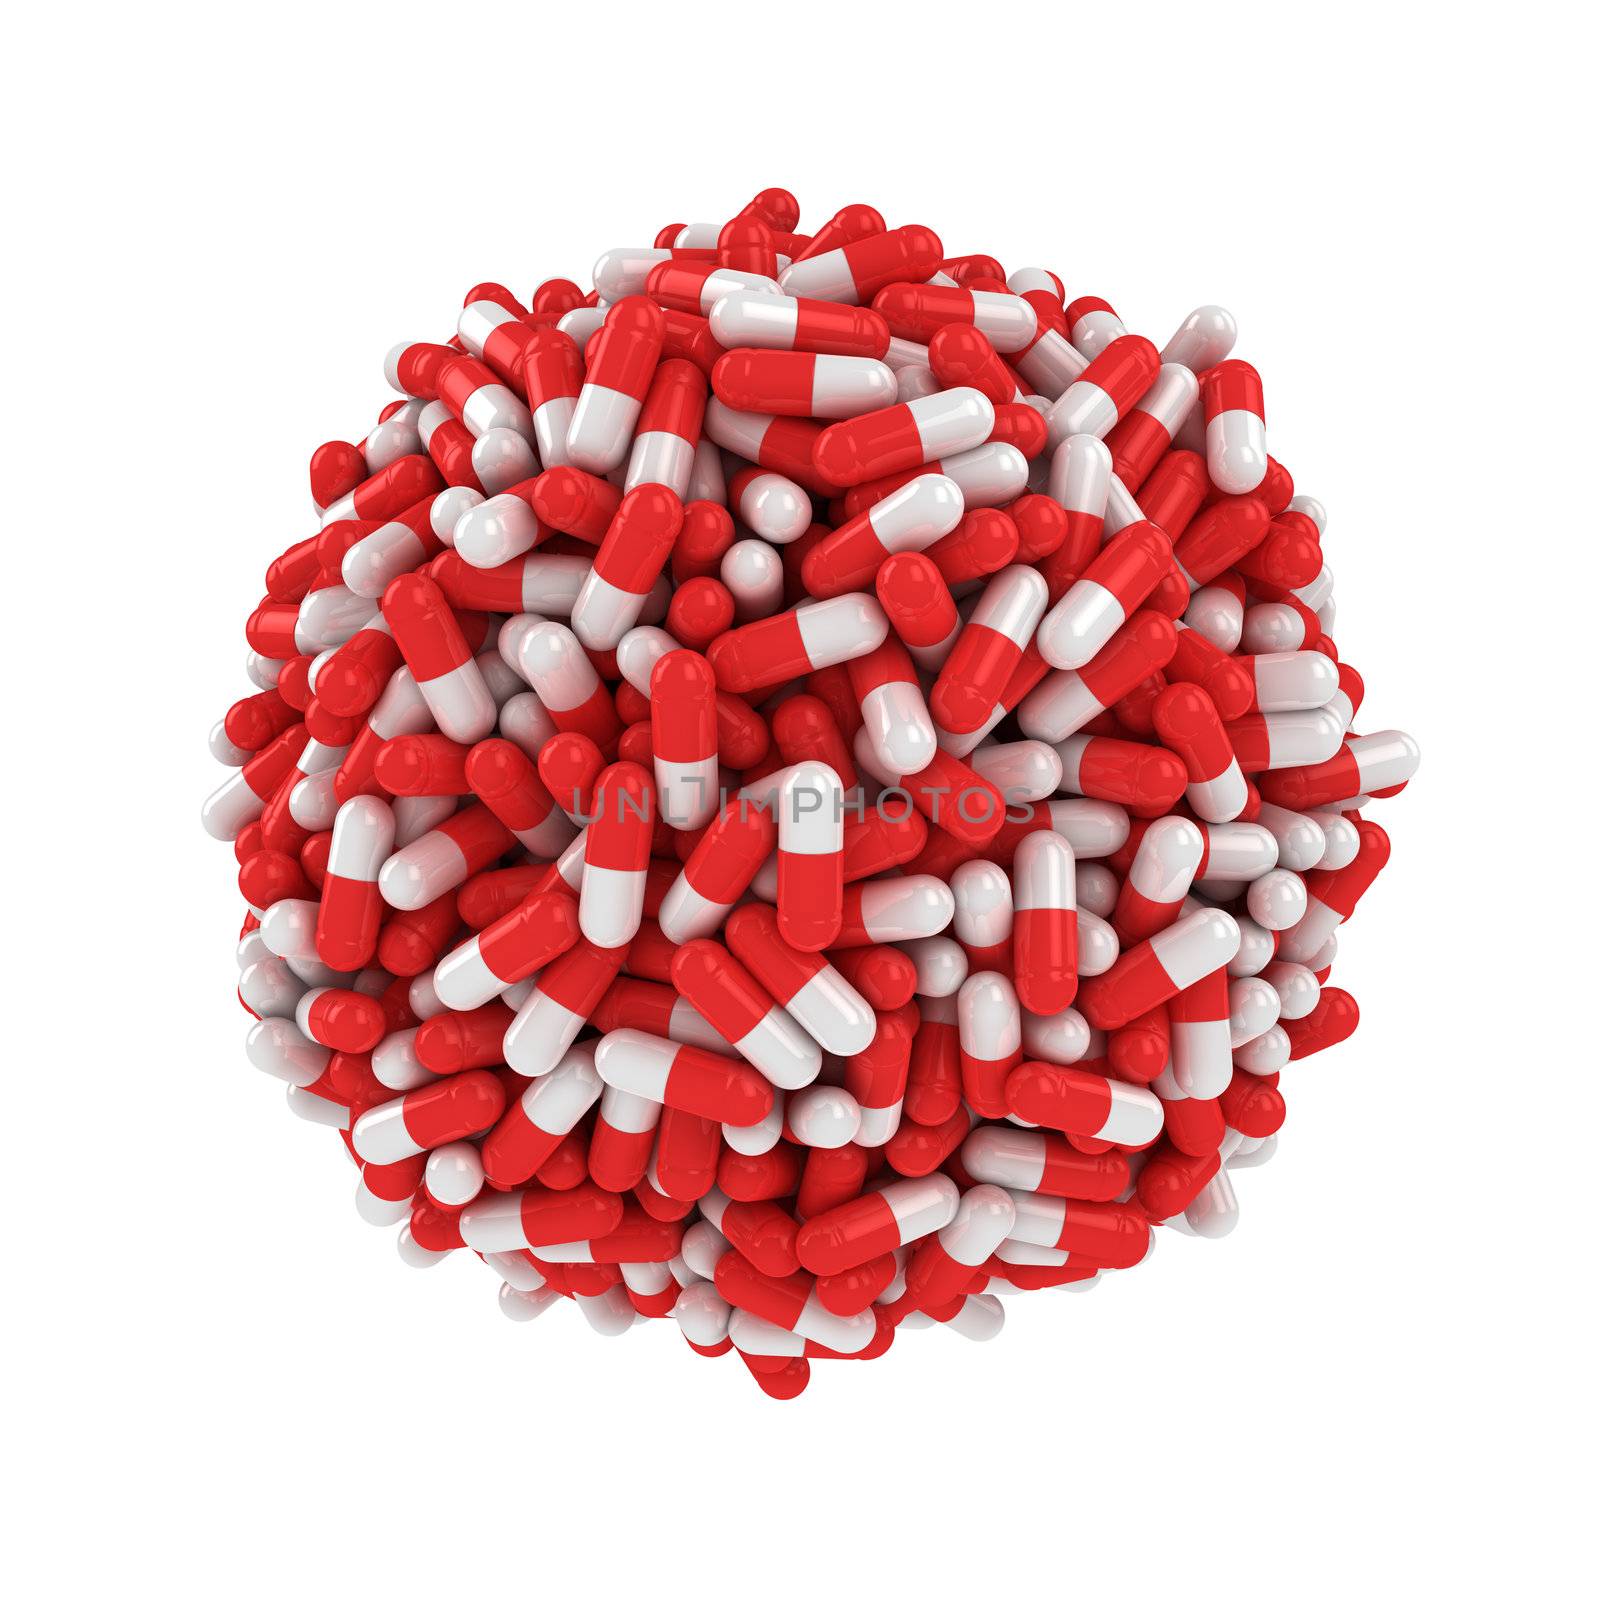 Big sphere made from many red-white capsules